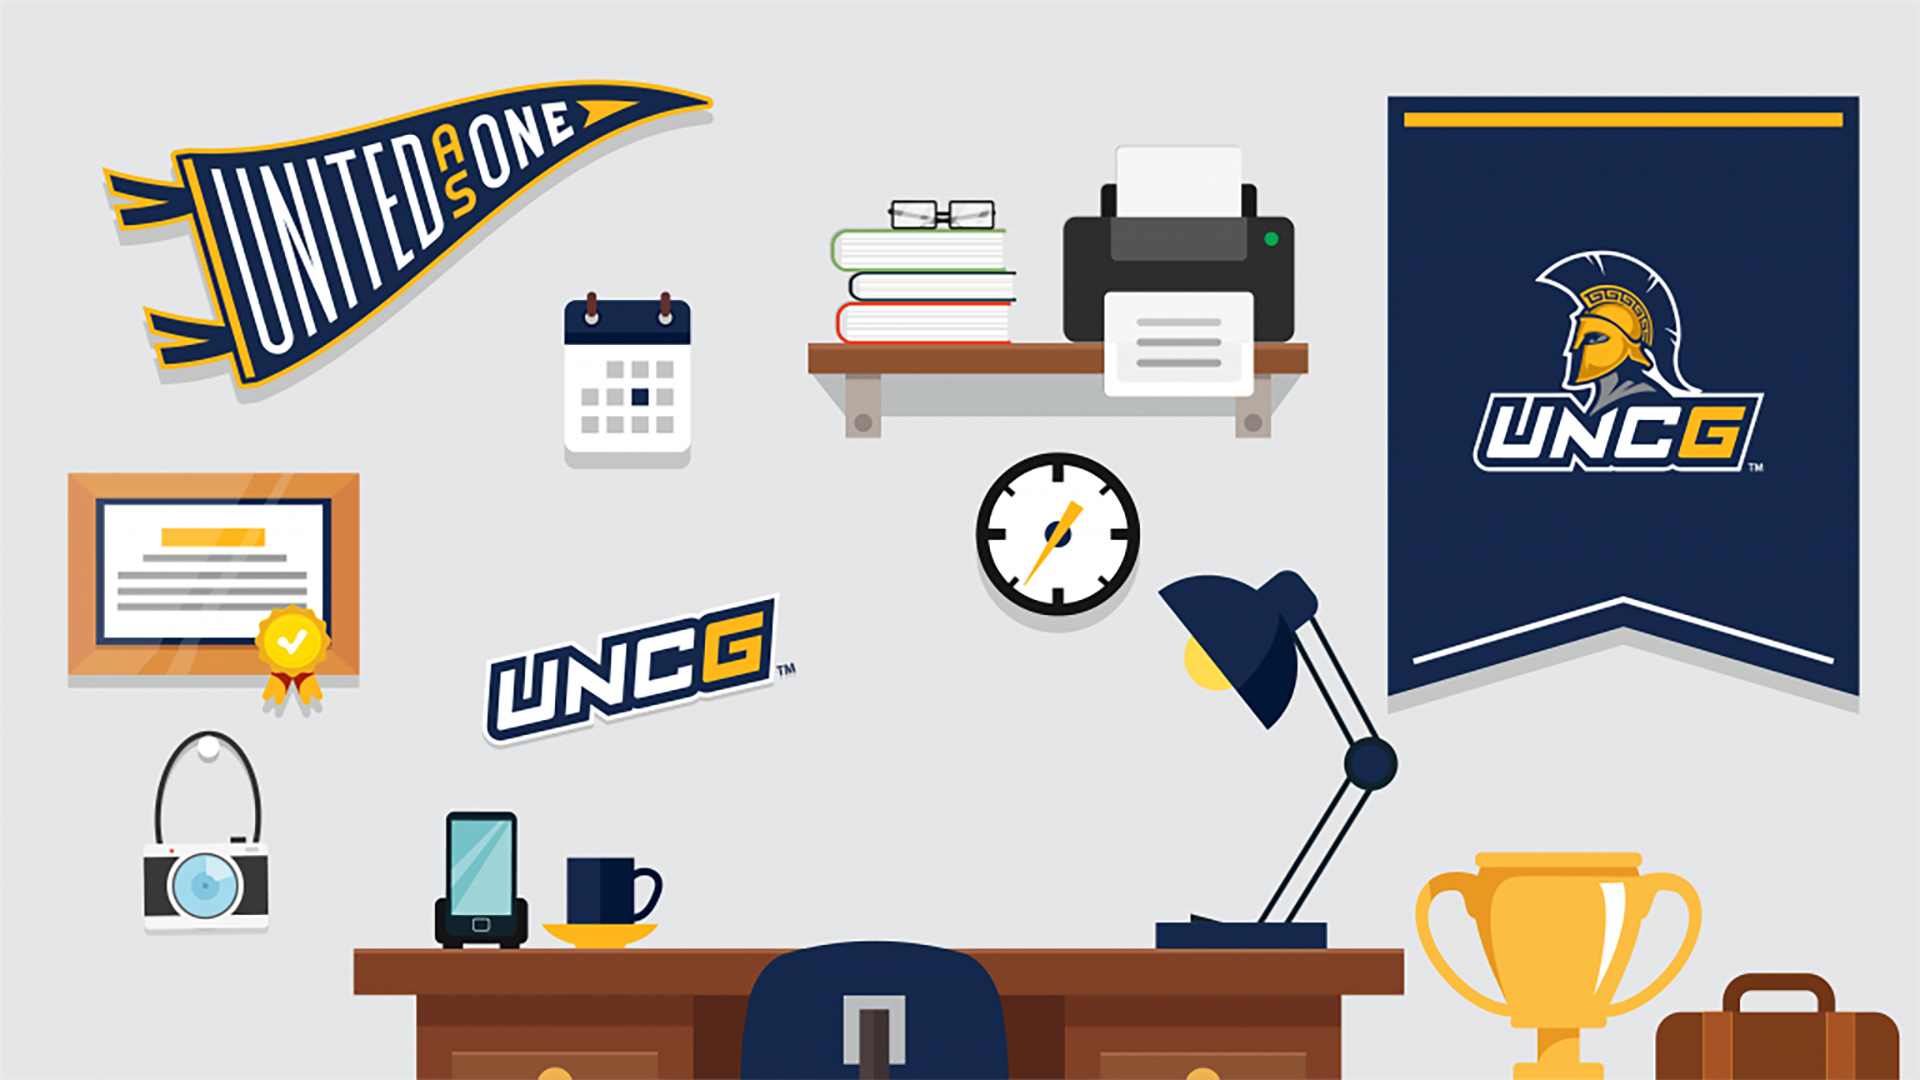 Illustrated wall showing various UNCG banners and swag